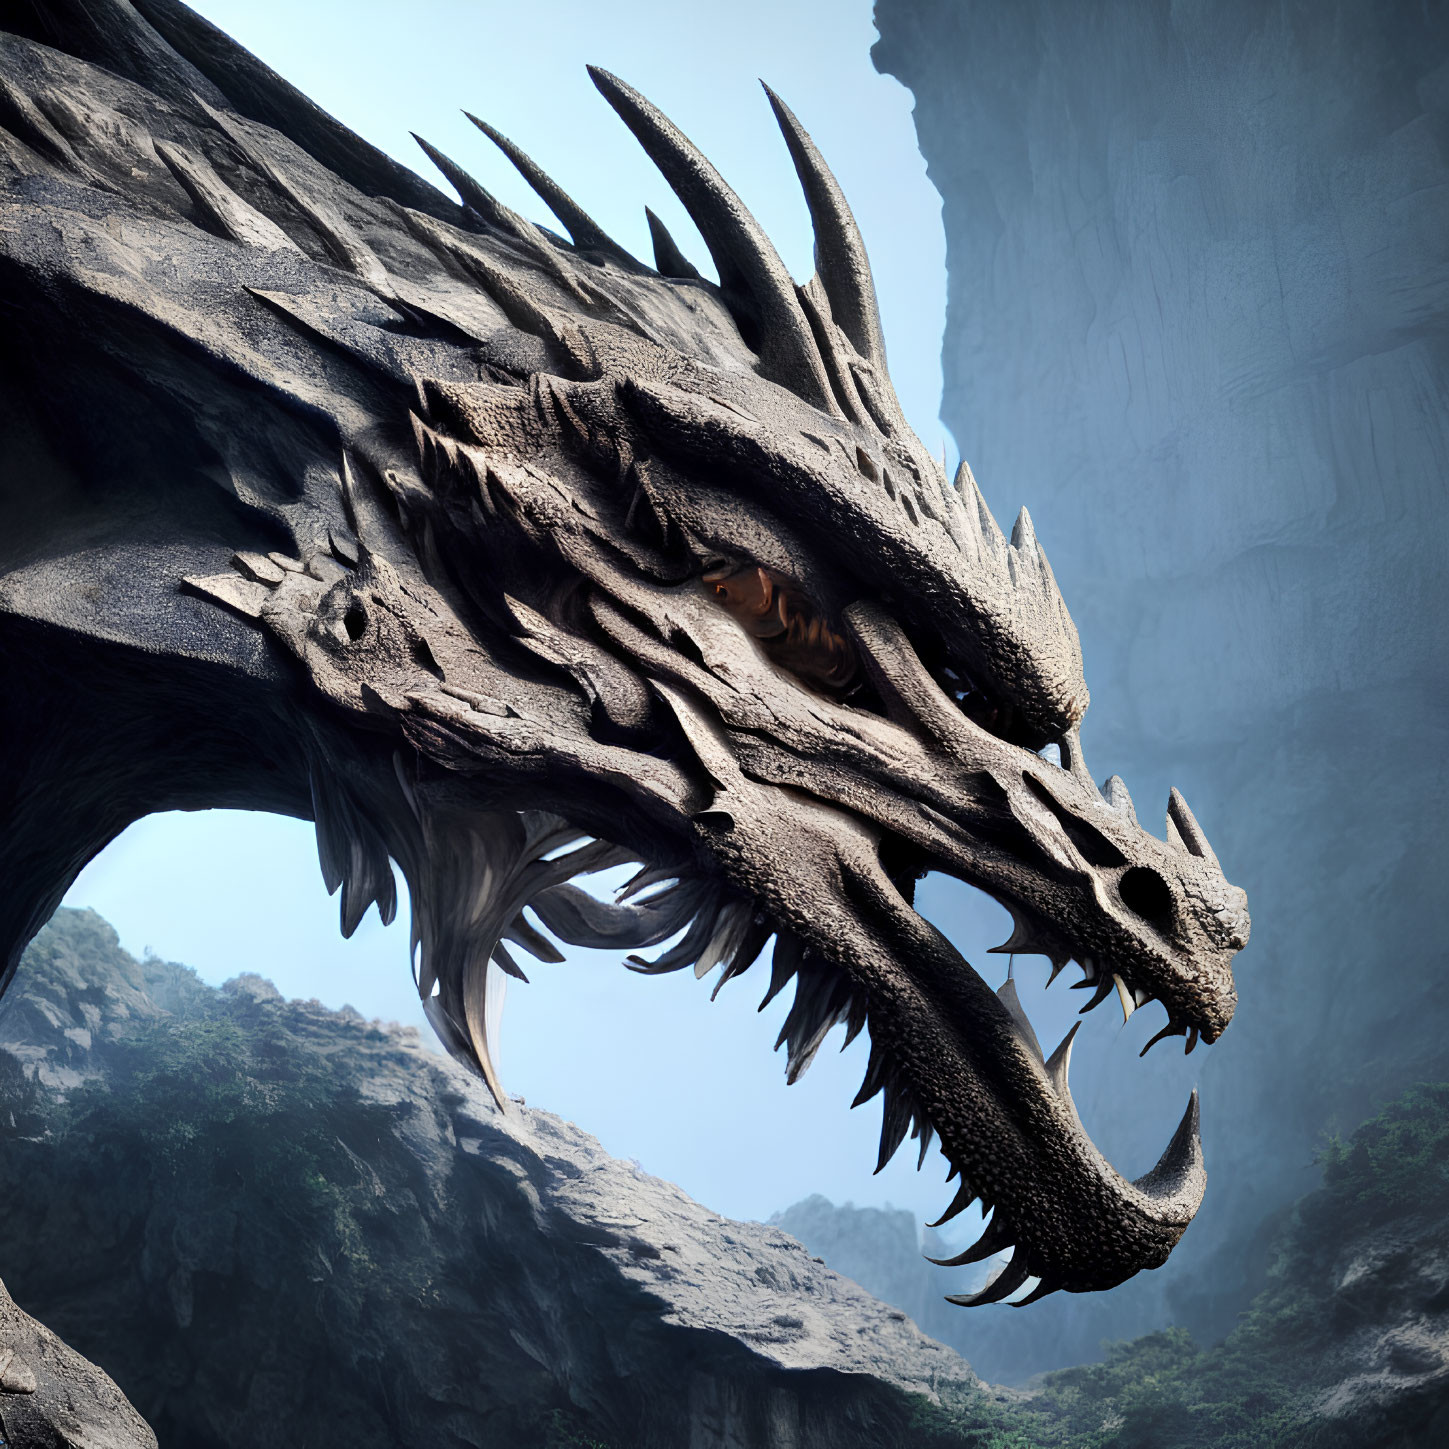 Detailed close-up of sharp-horned dragon head in rocky landscape